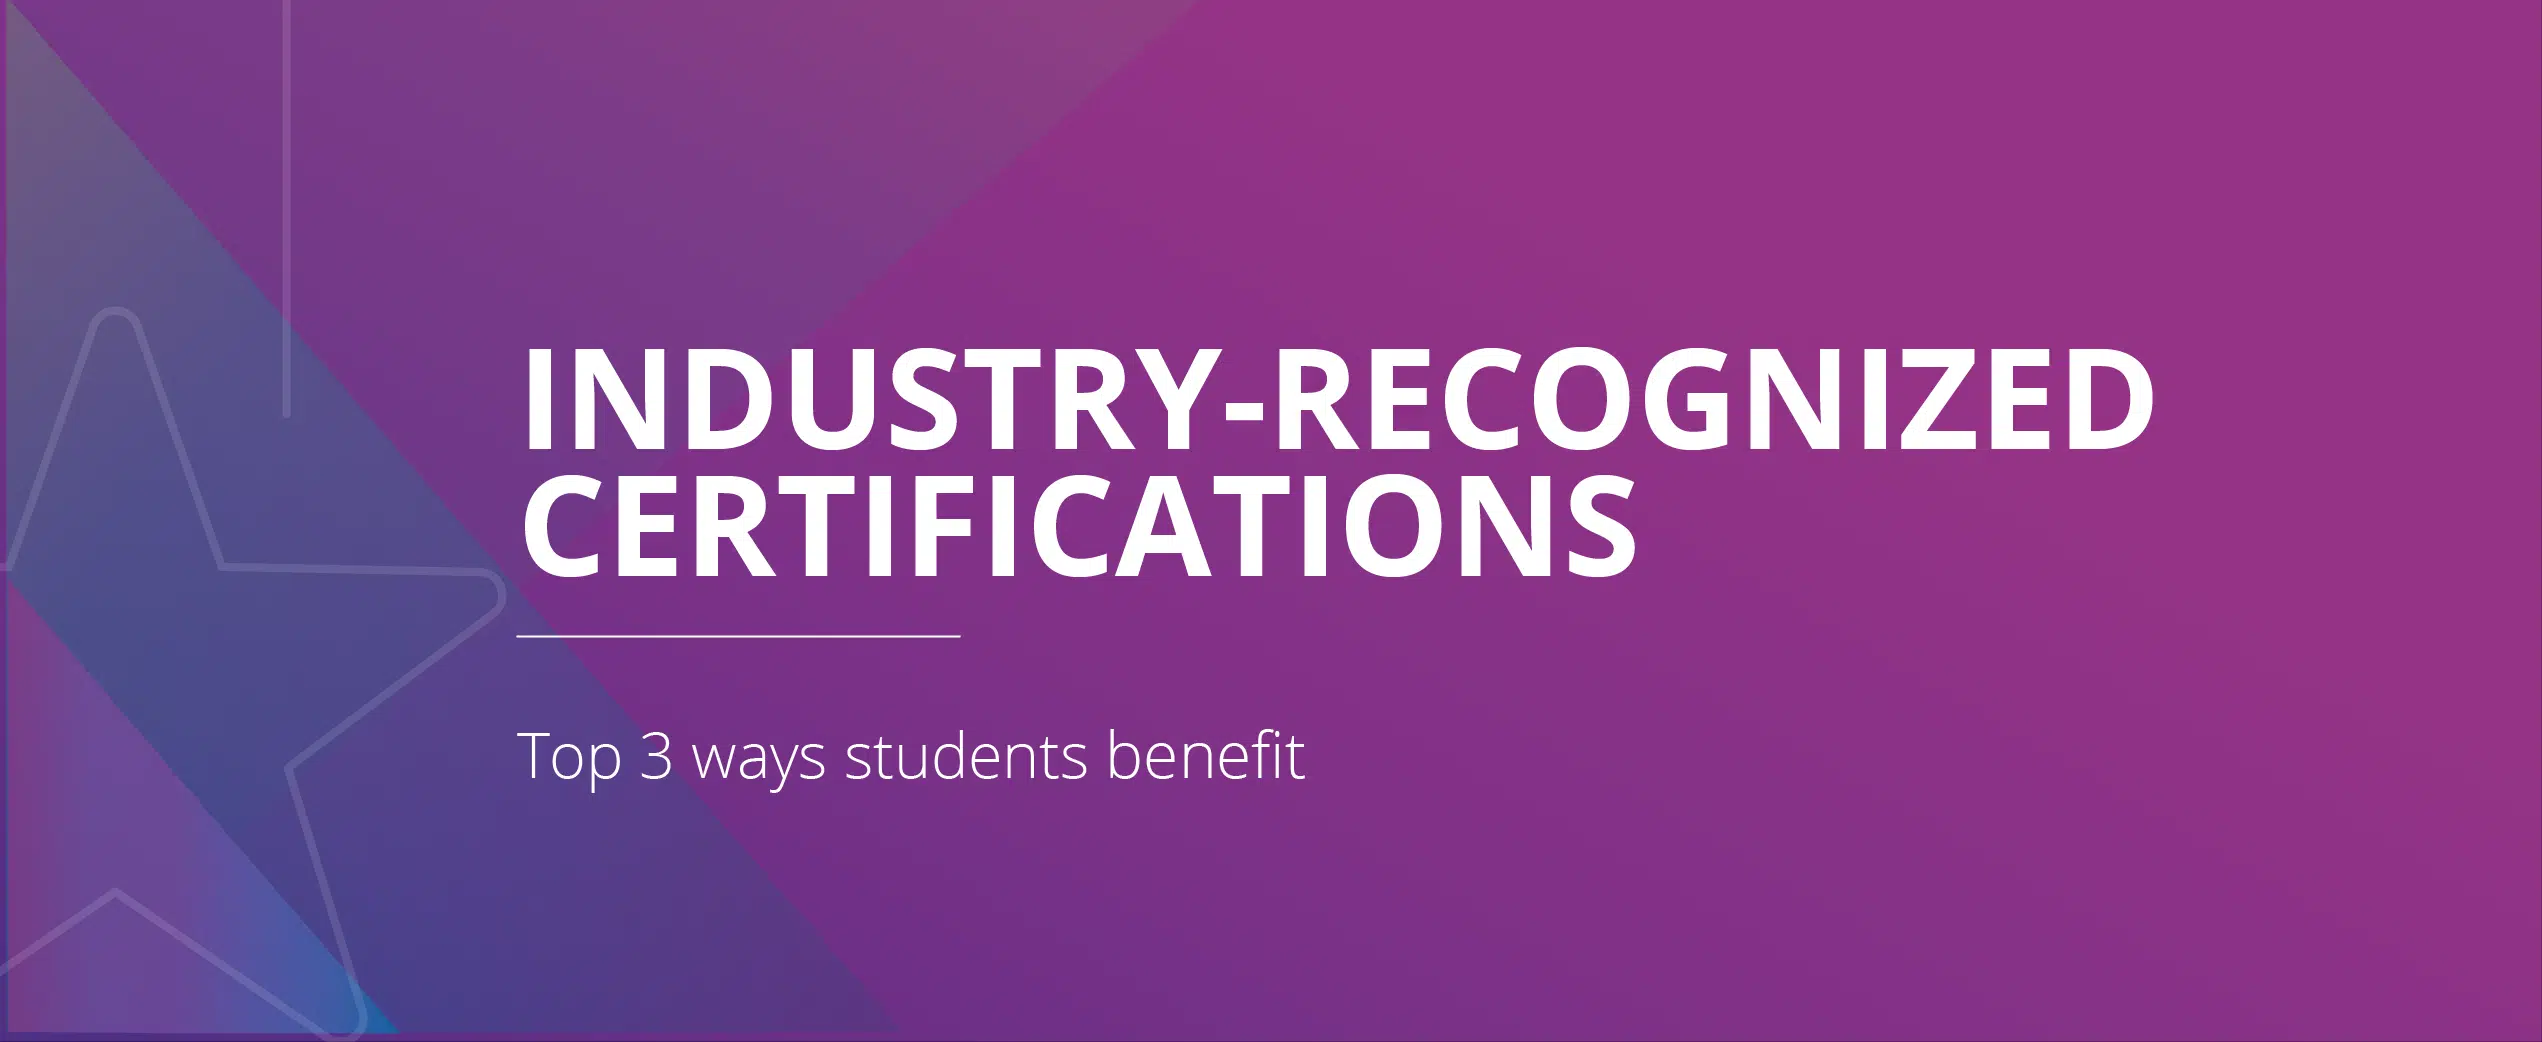 Top 3 ways students benefit from industry-recognized certifications